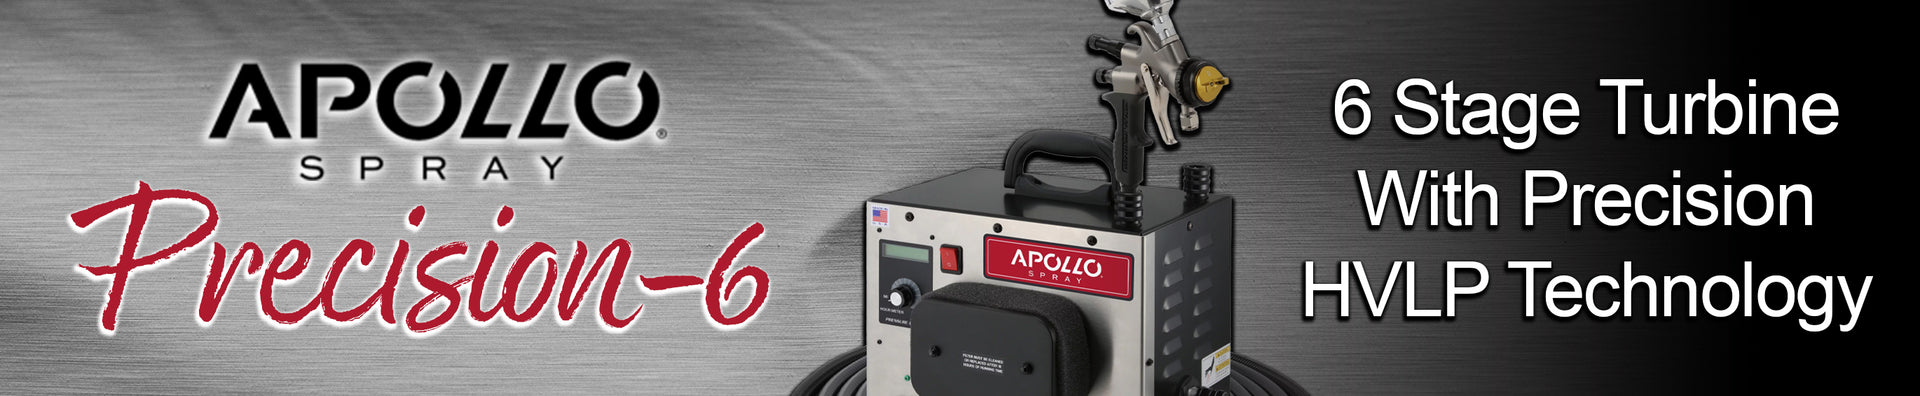 Apollo HVLP paint sprayers available at Paint Life Supply Co.